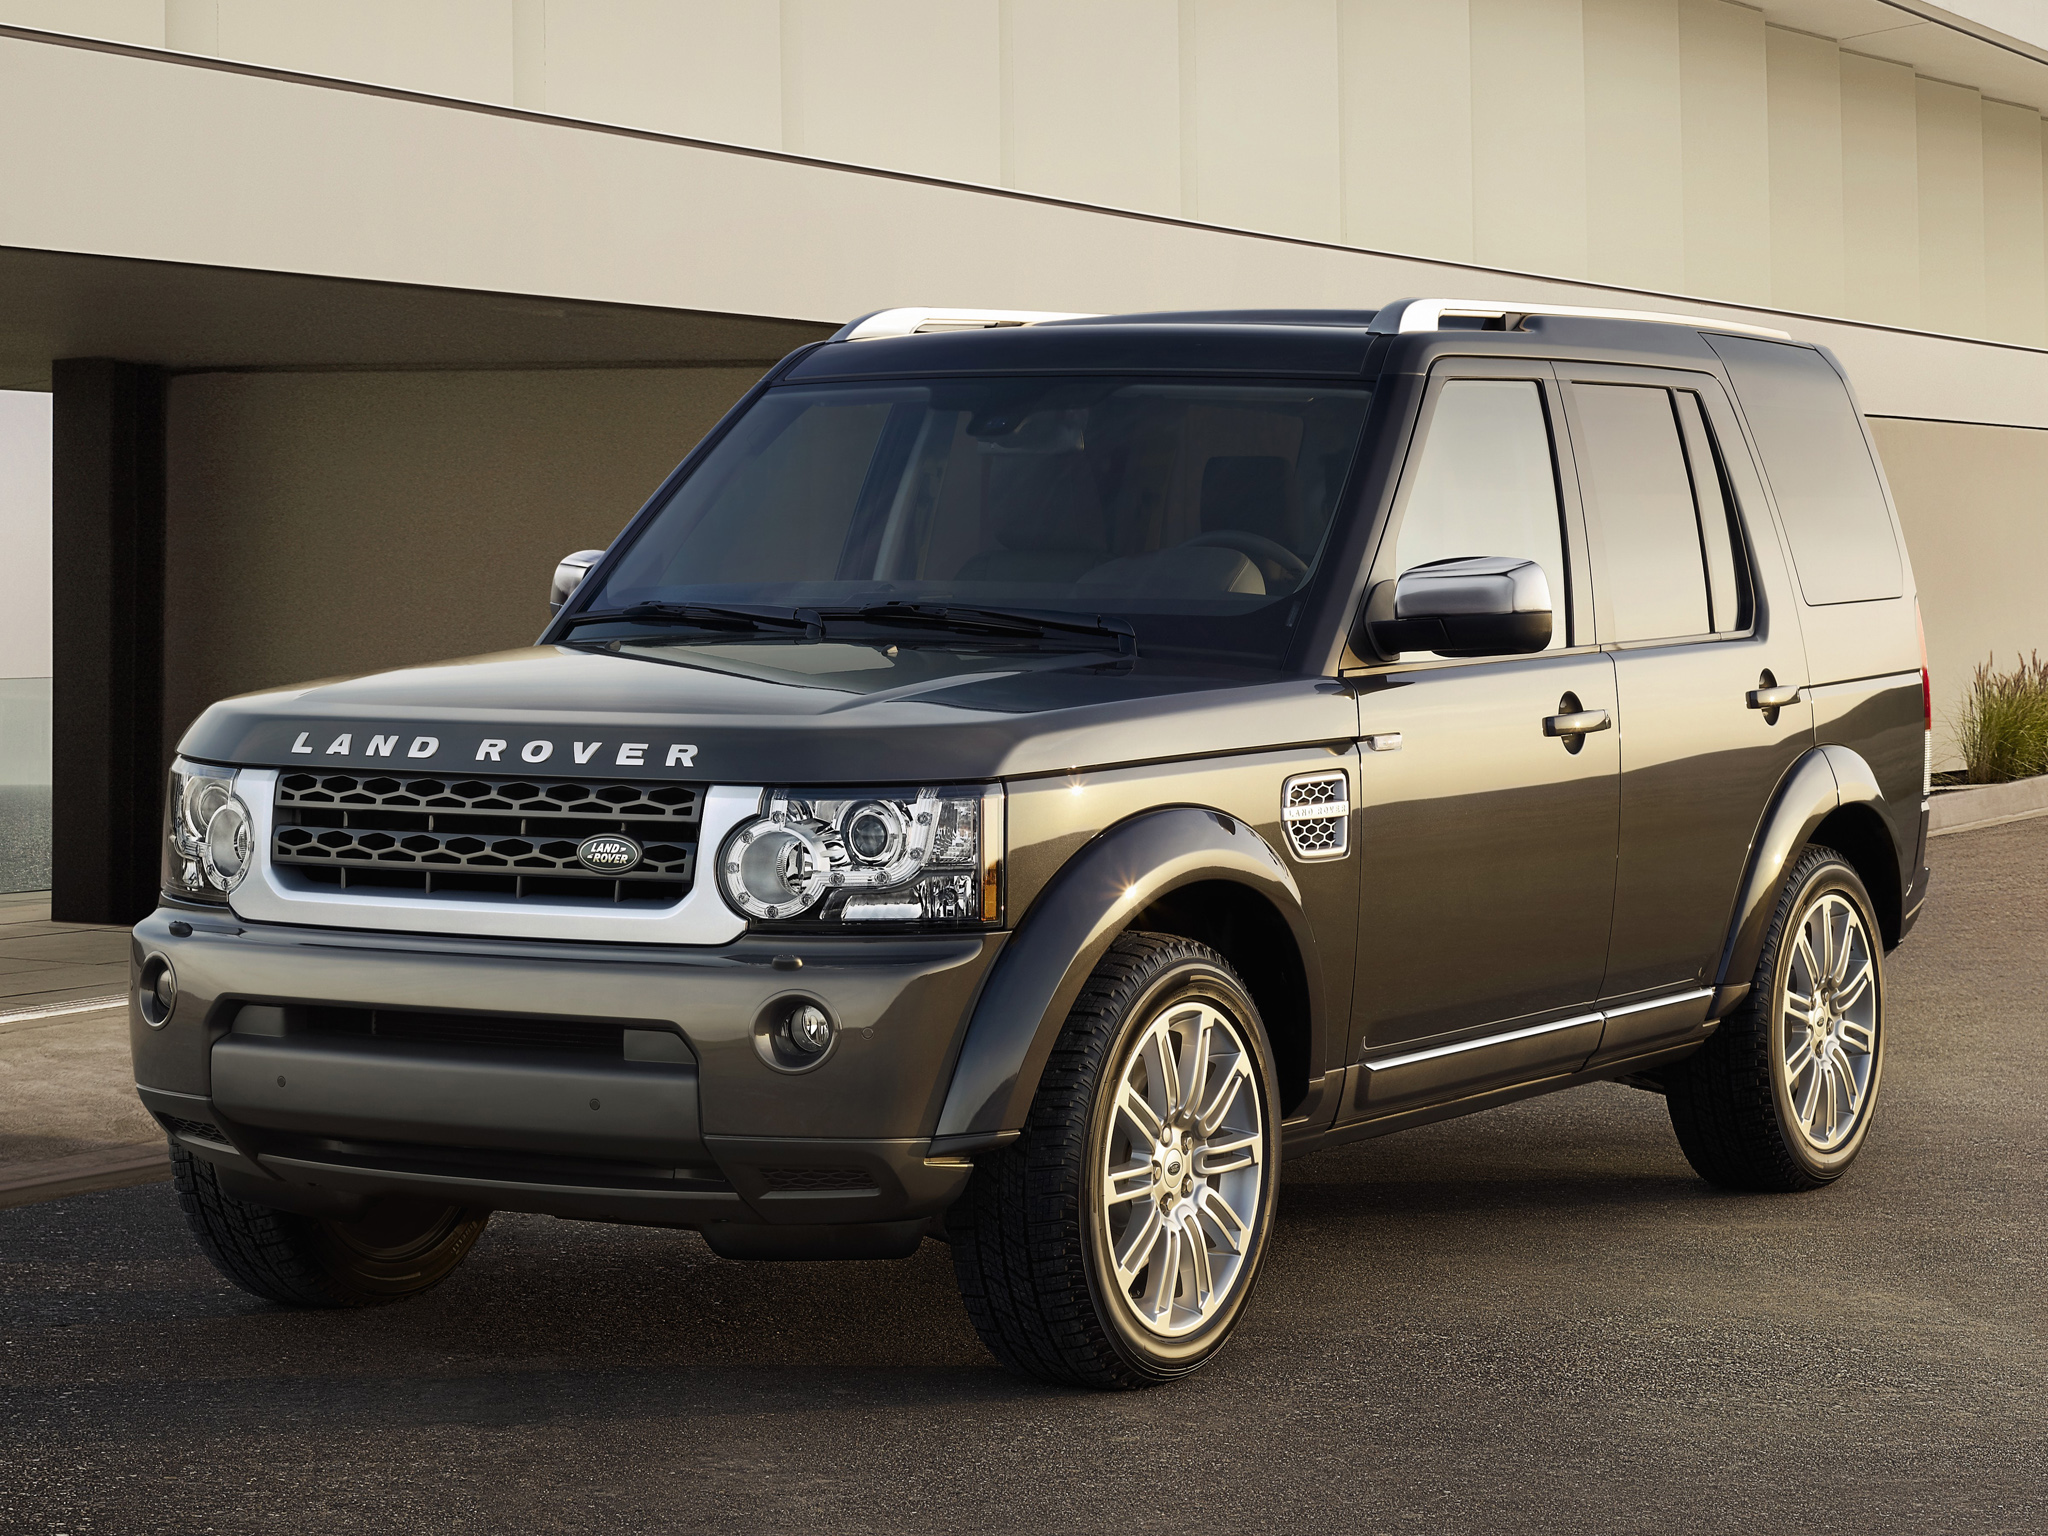 Land Rover Discovery IV 2009 - 2013 SUV 5 door #2